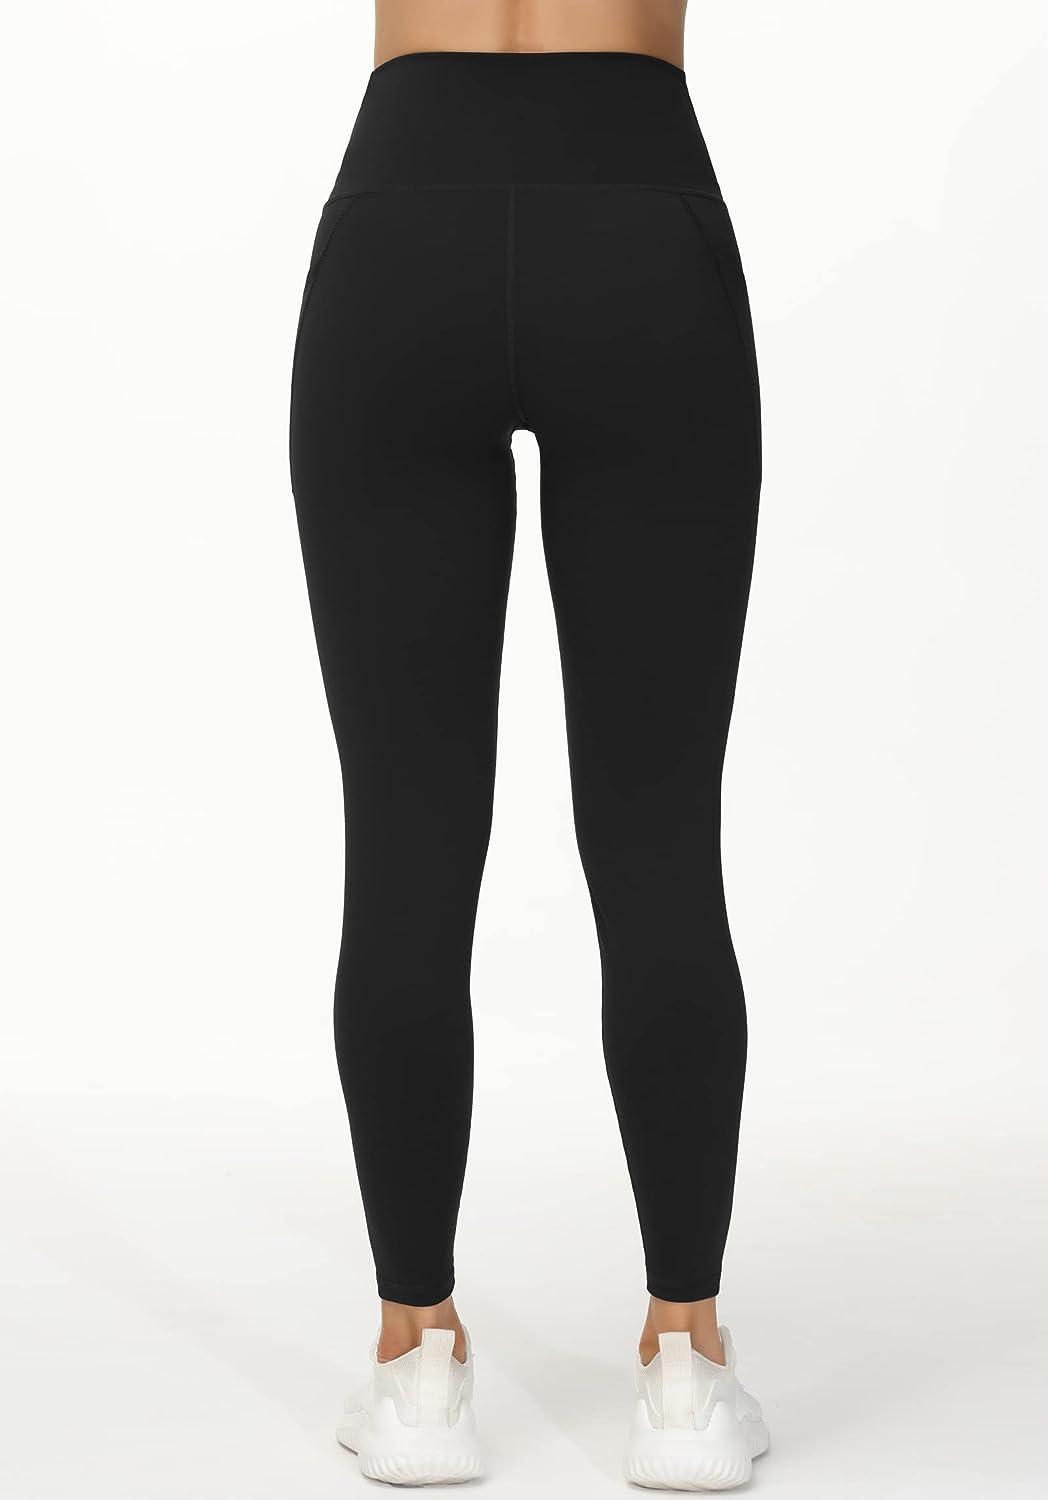 THE GYM PEOPLE Women's V Cross Waist Workout Leggings Tummy Control Running Yoga  Pants with Pockets Black Small